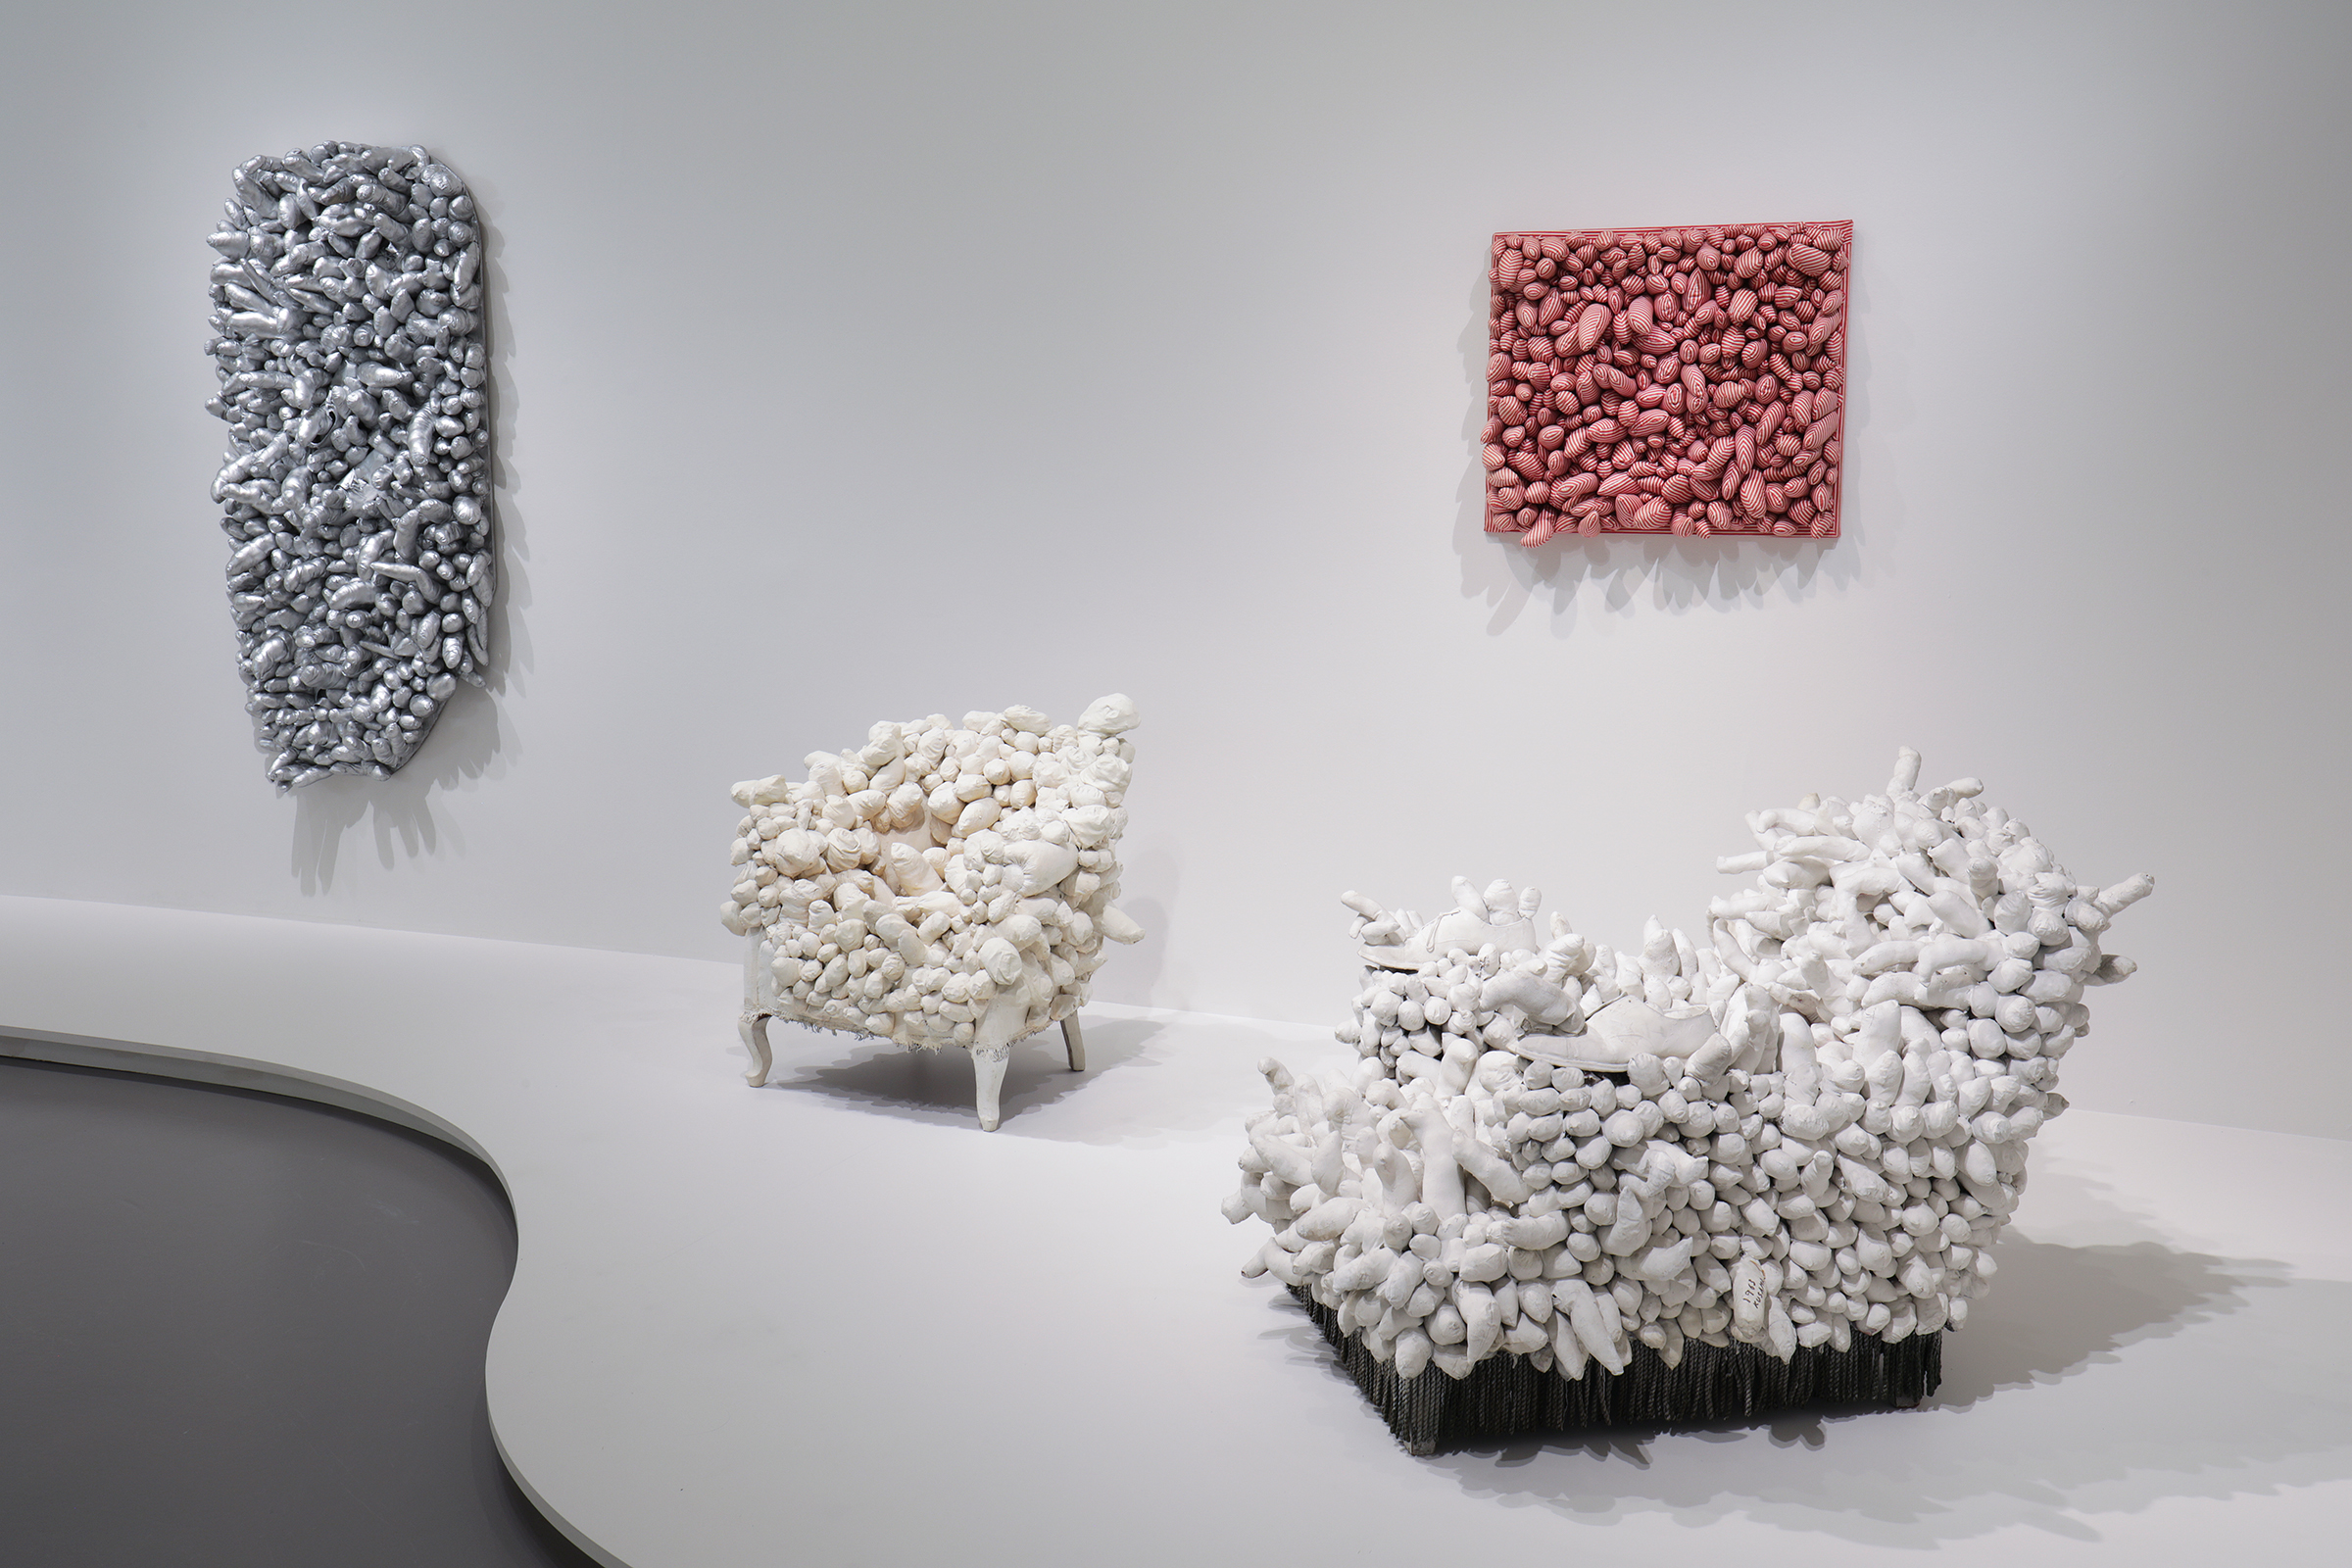 Left to right: Ennui, 1976; Accumulation, 1962-64; Red Stripes, 1965; Arm Chair, 1963.